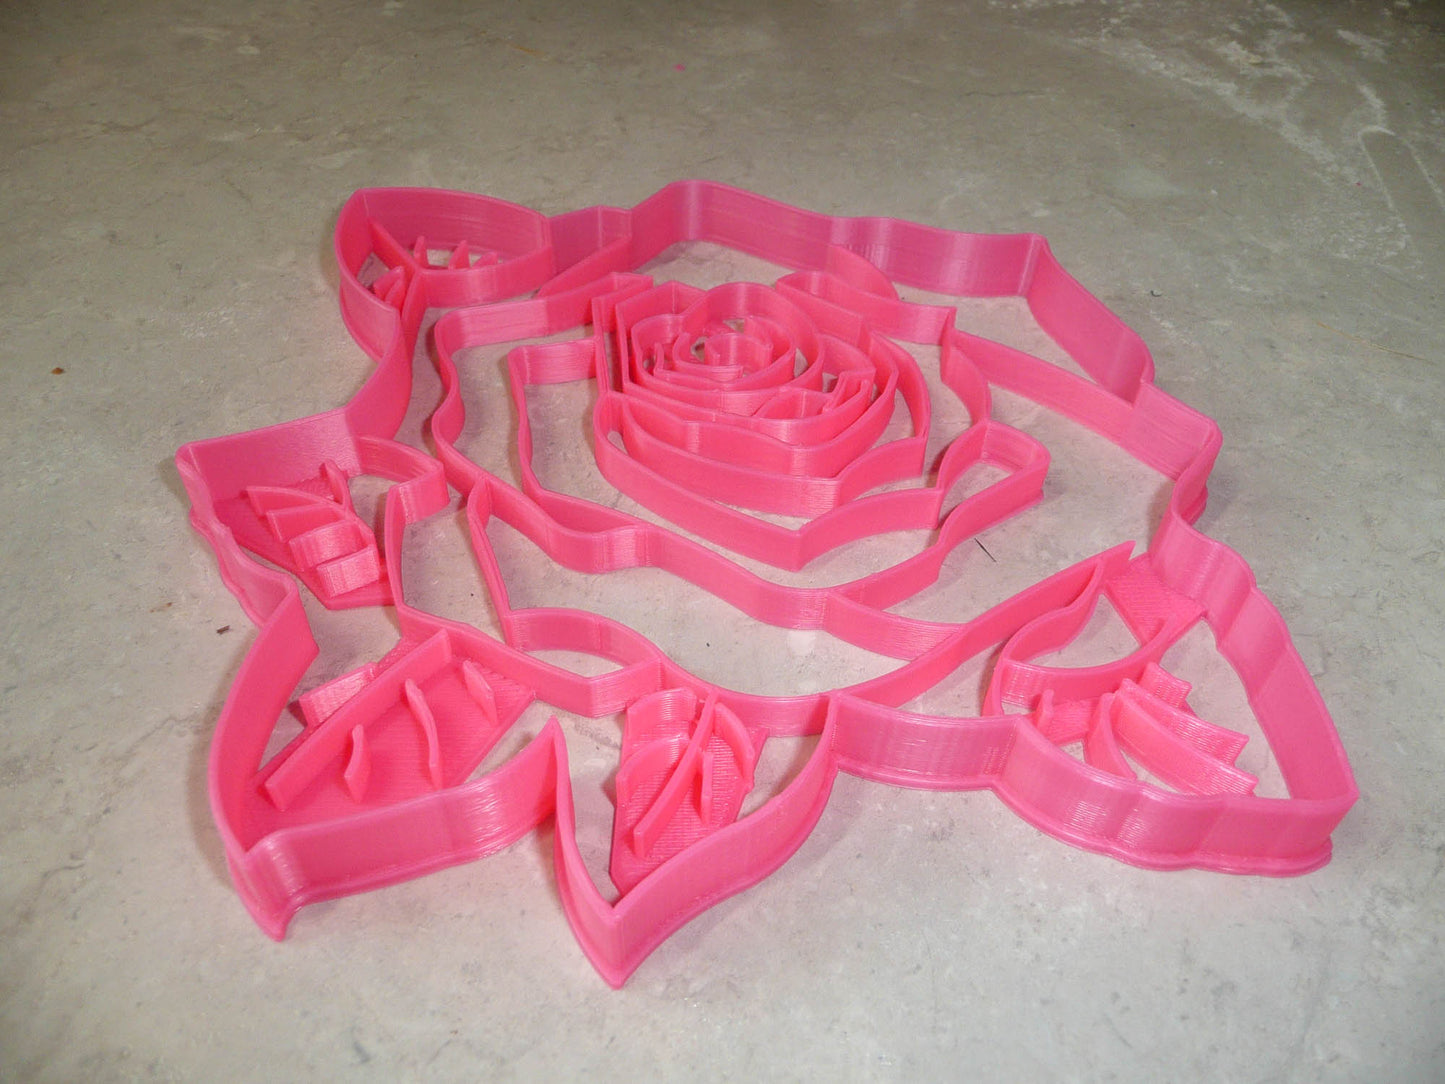 Rose Flower 7.5 Inch Pie Top Topper Design Or Large Cookie Cutter USA PR3314